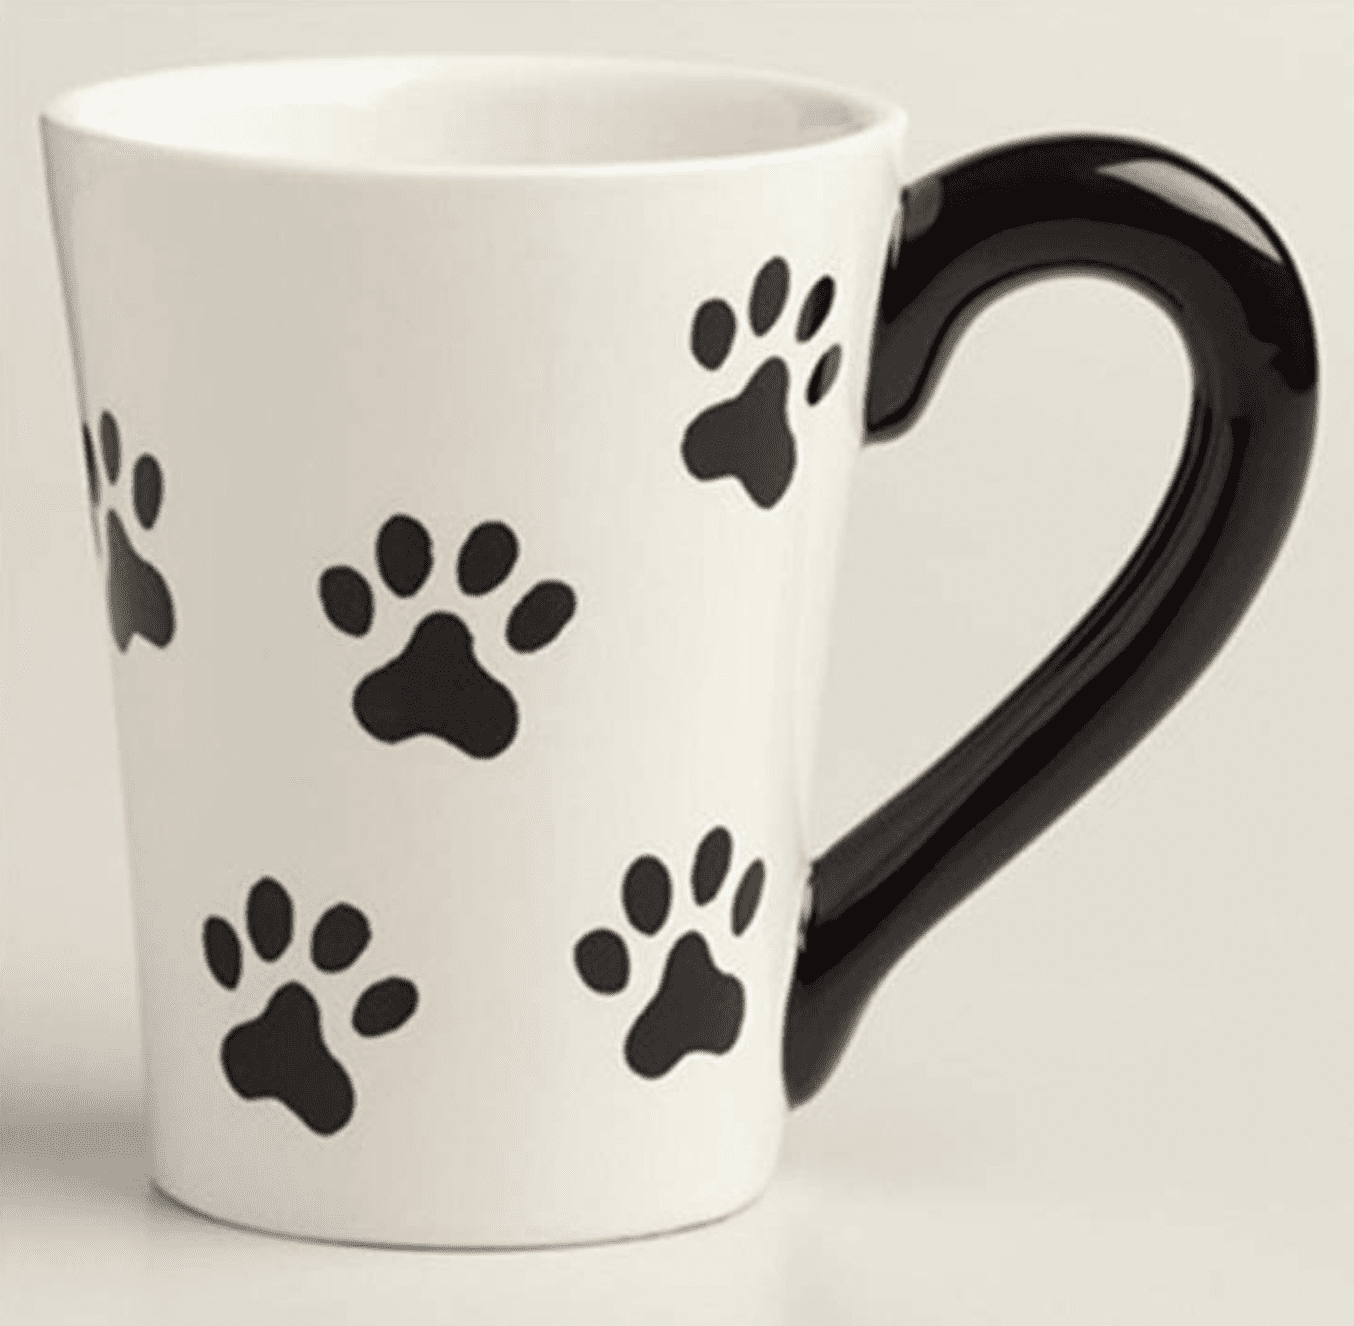  luckyse Surprise Dog Coffee Mug with Small Puppy Inside - 8  Oz,Best Funny Gift Ceramic Cups : Home & Kitchen